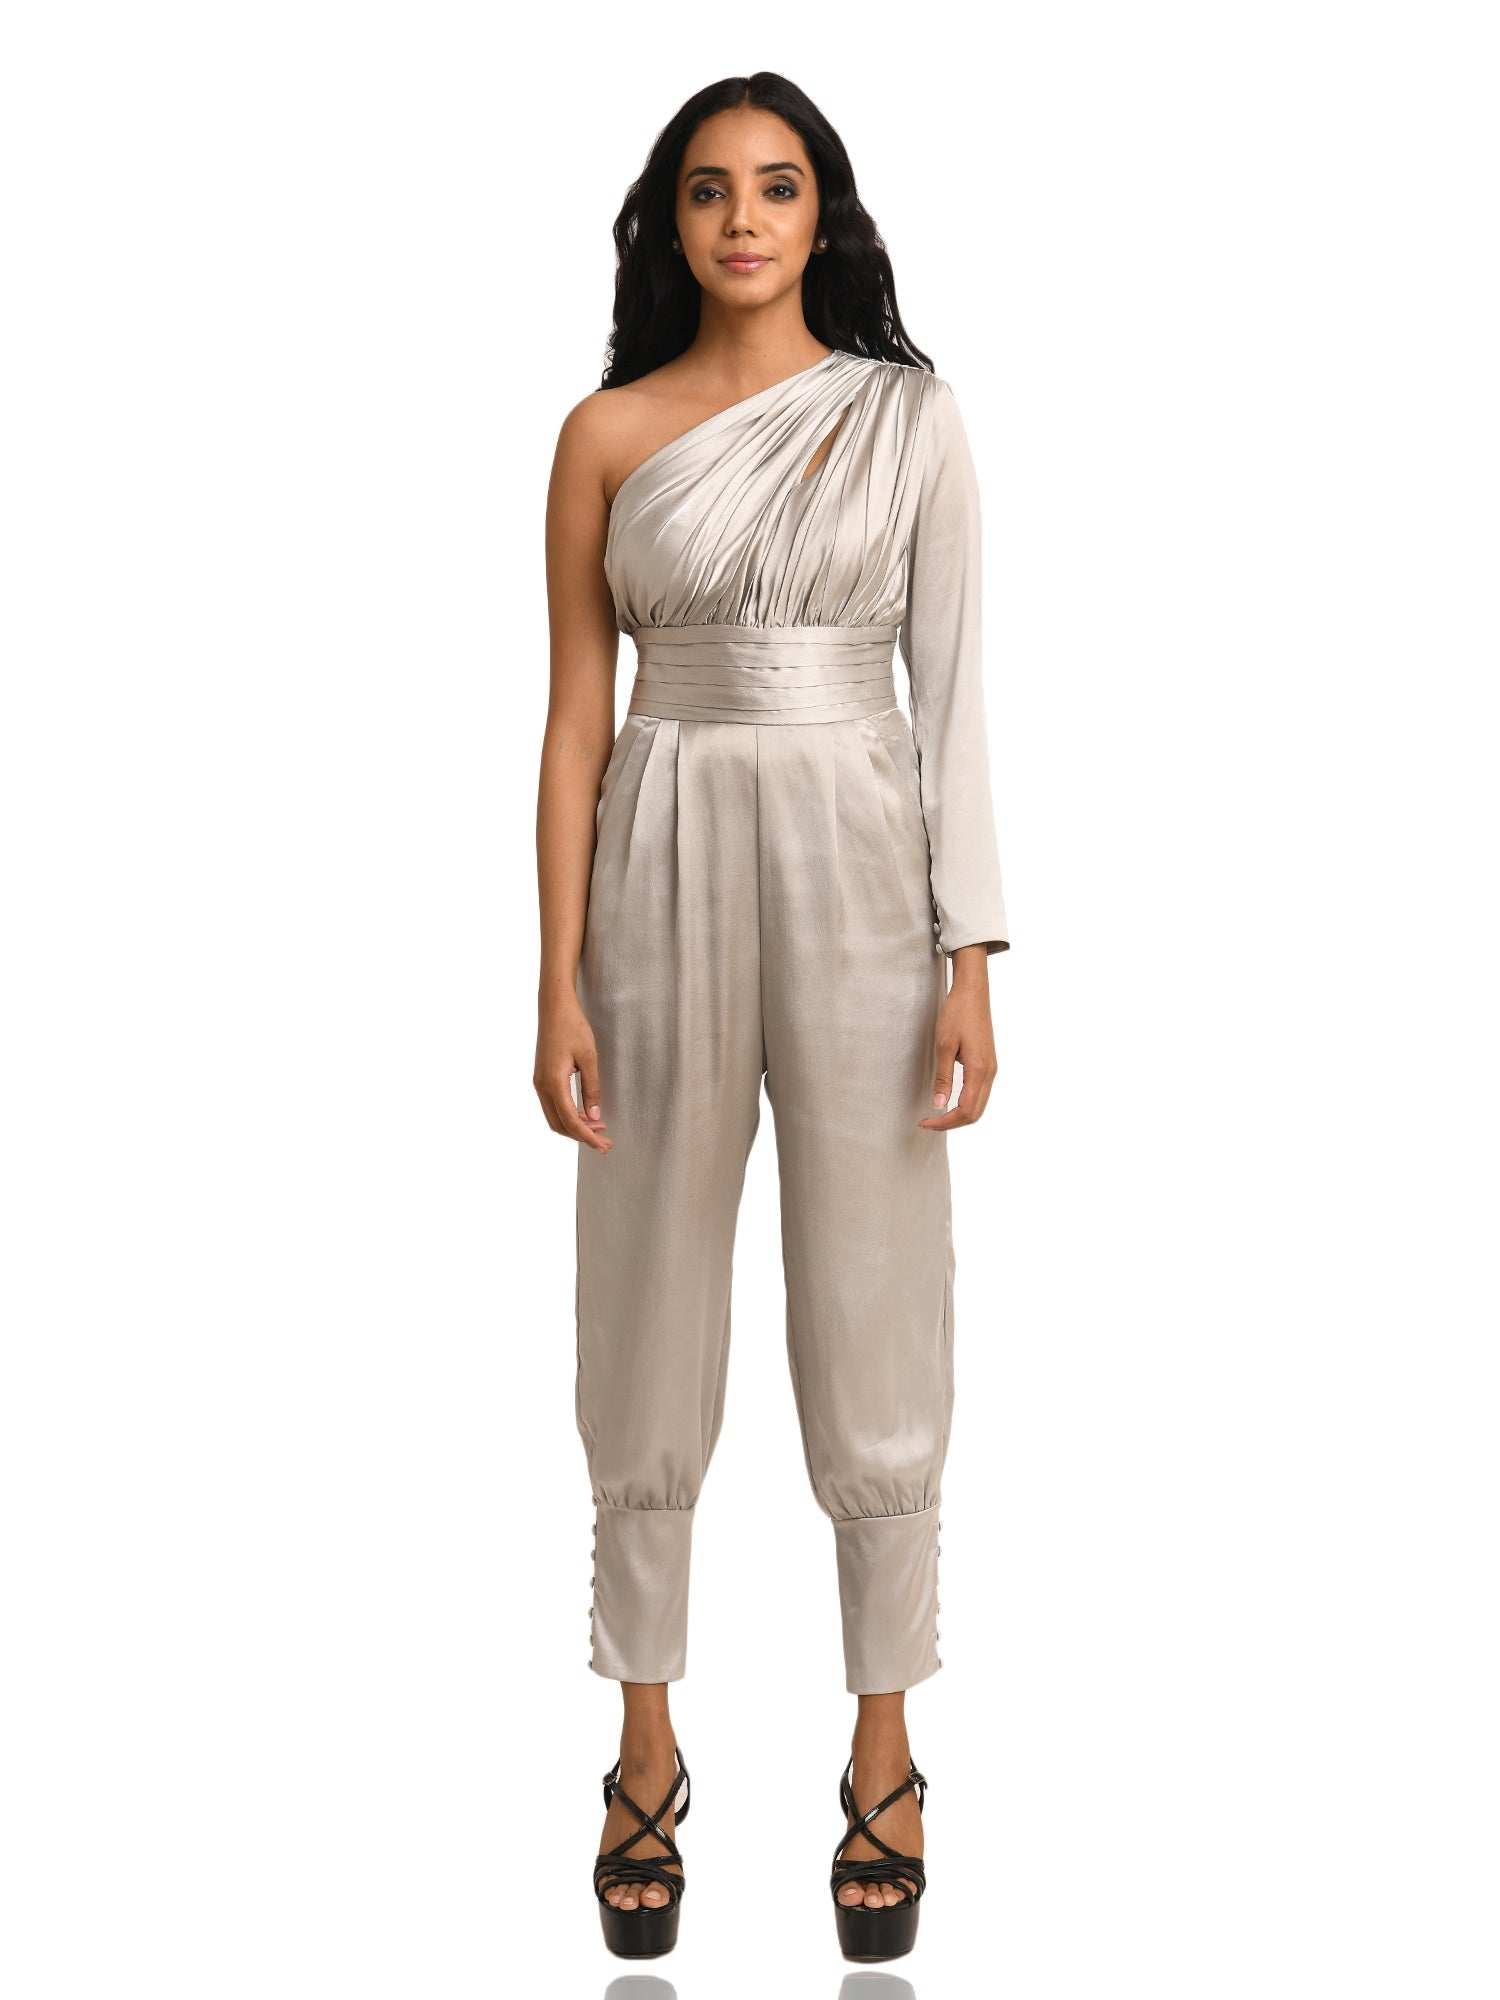 shining star silver jumpsuit